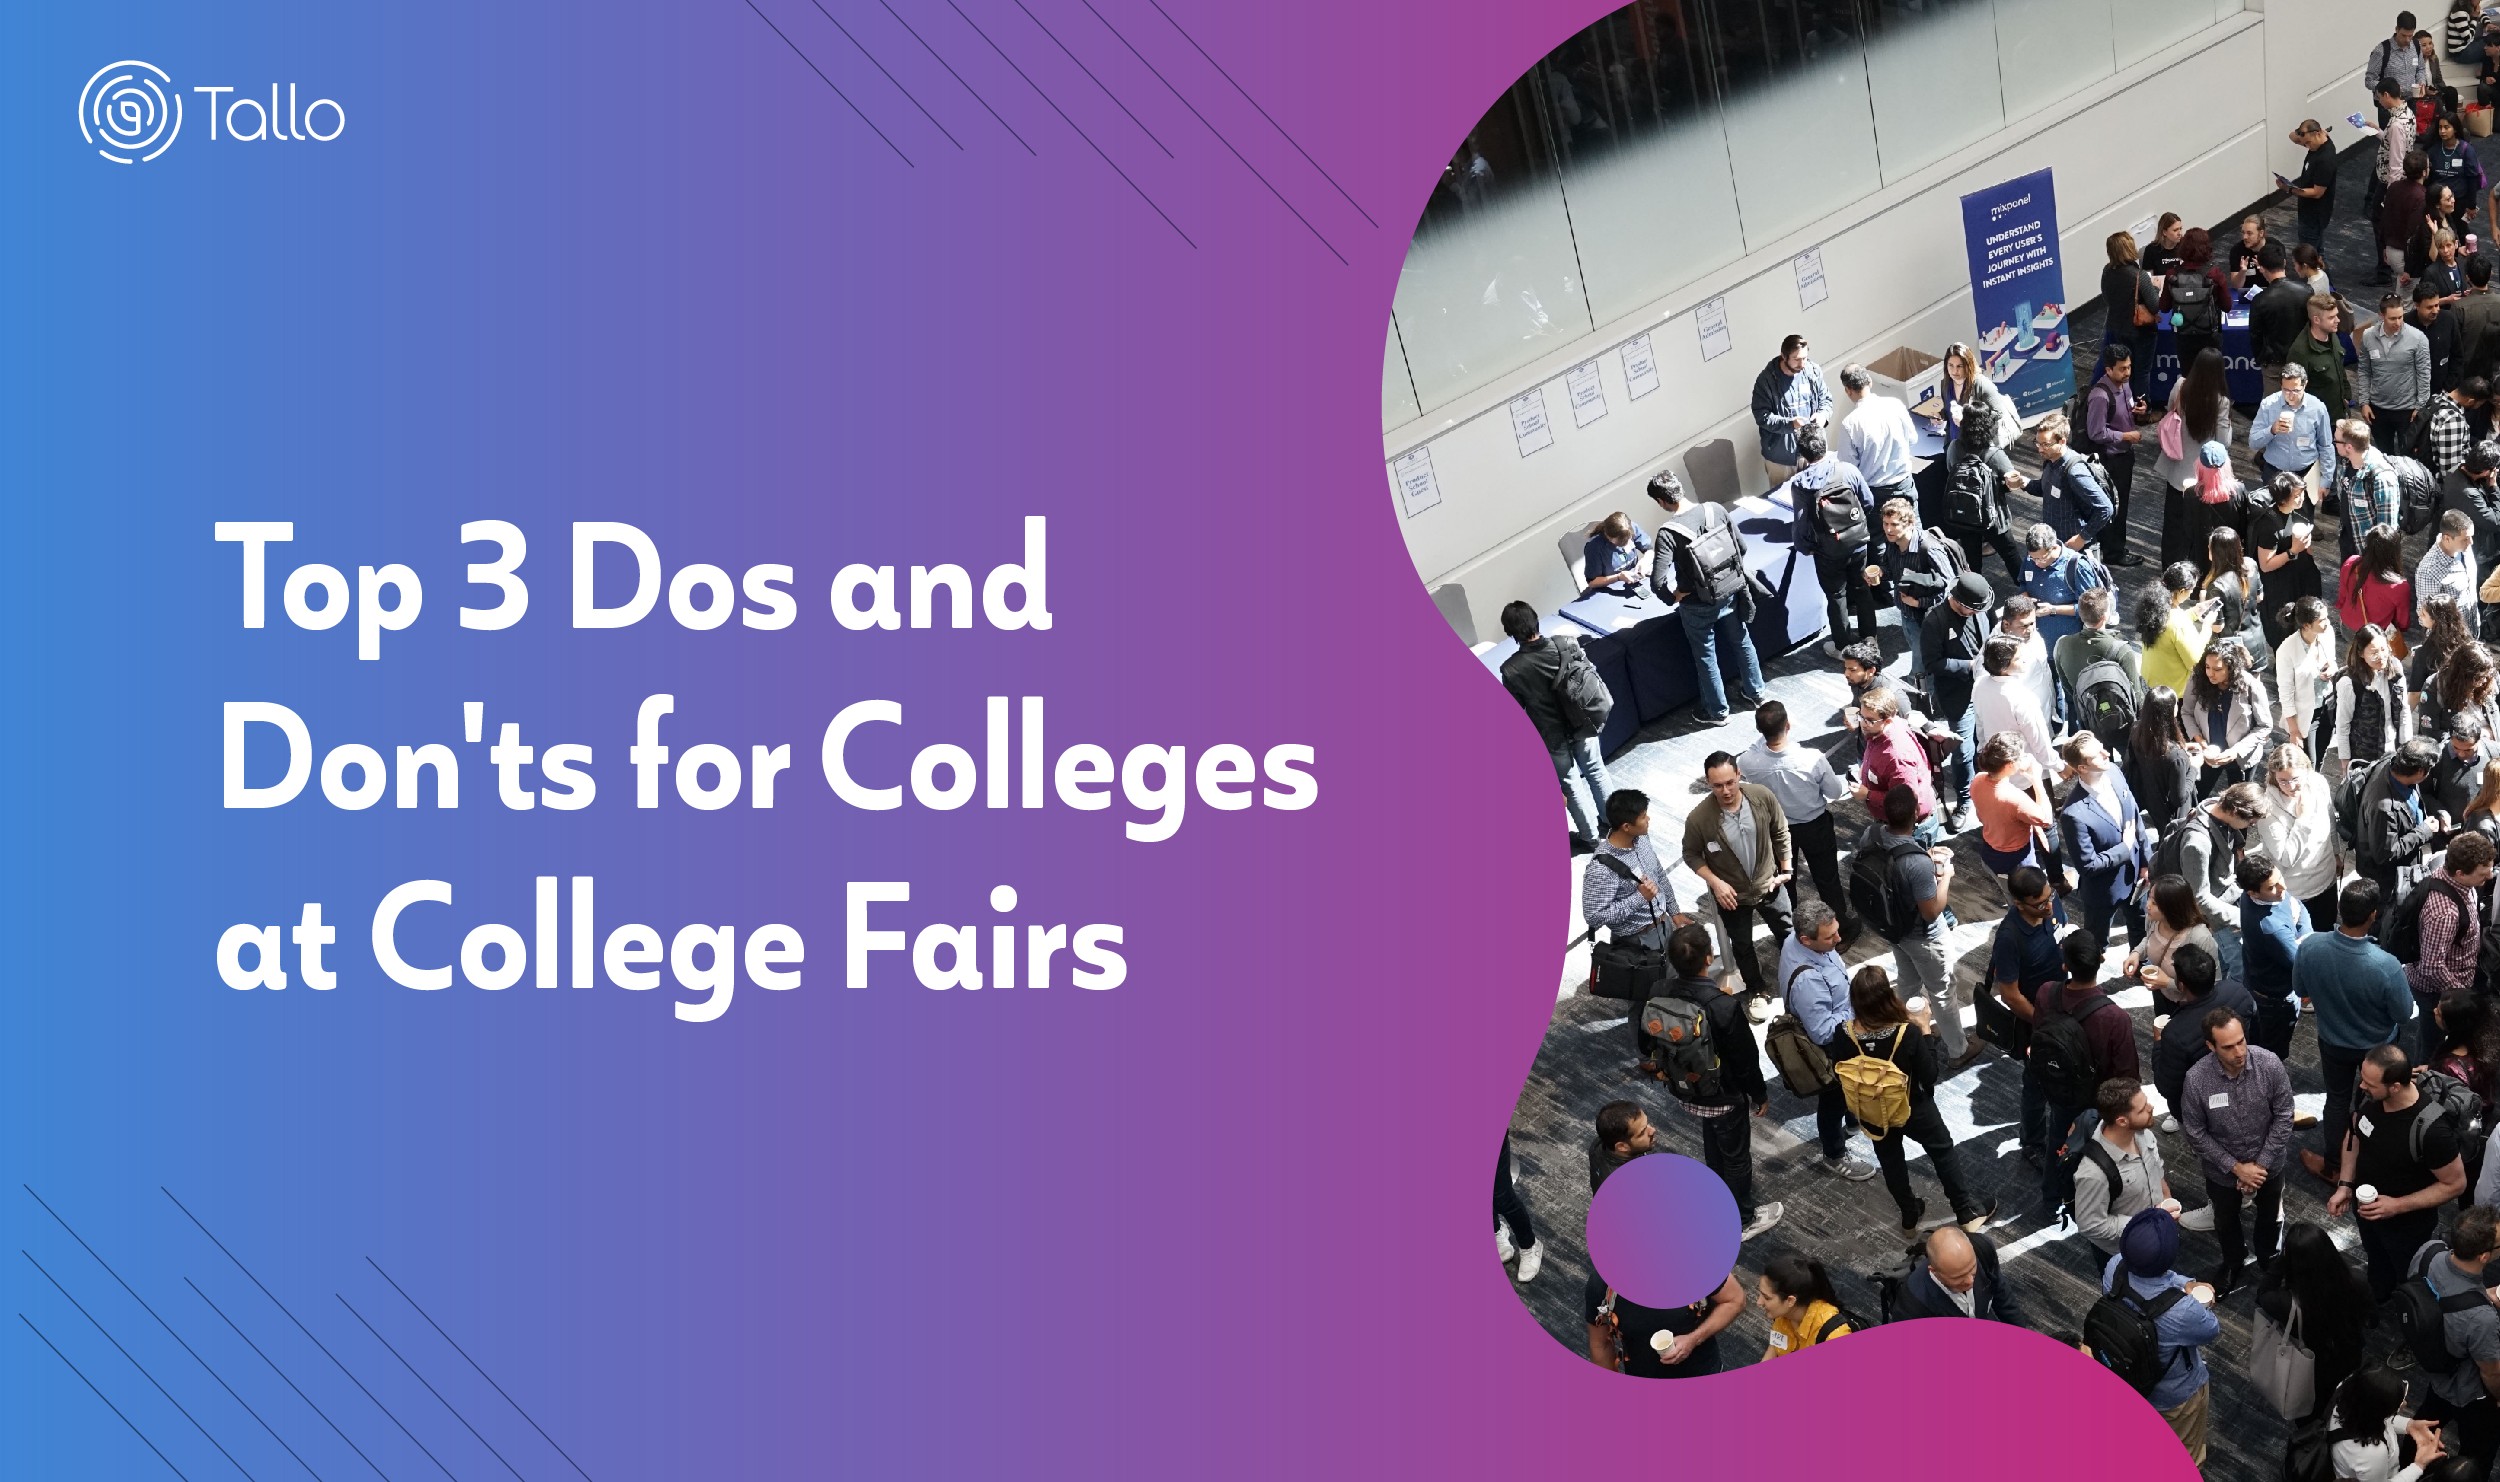 Top 3 Dos and Don'ts for Colleges at College Fairs Tallo